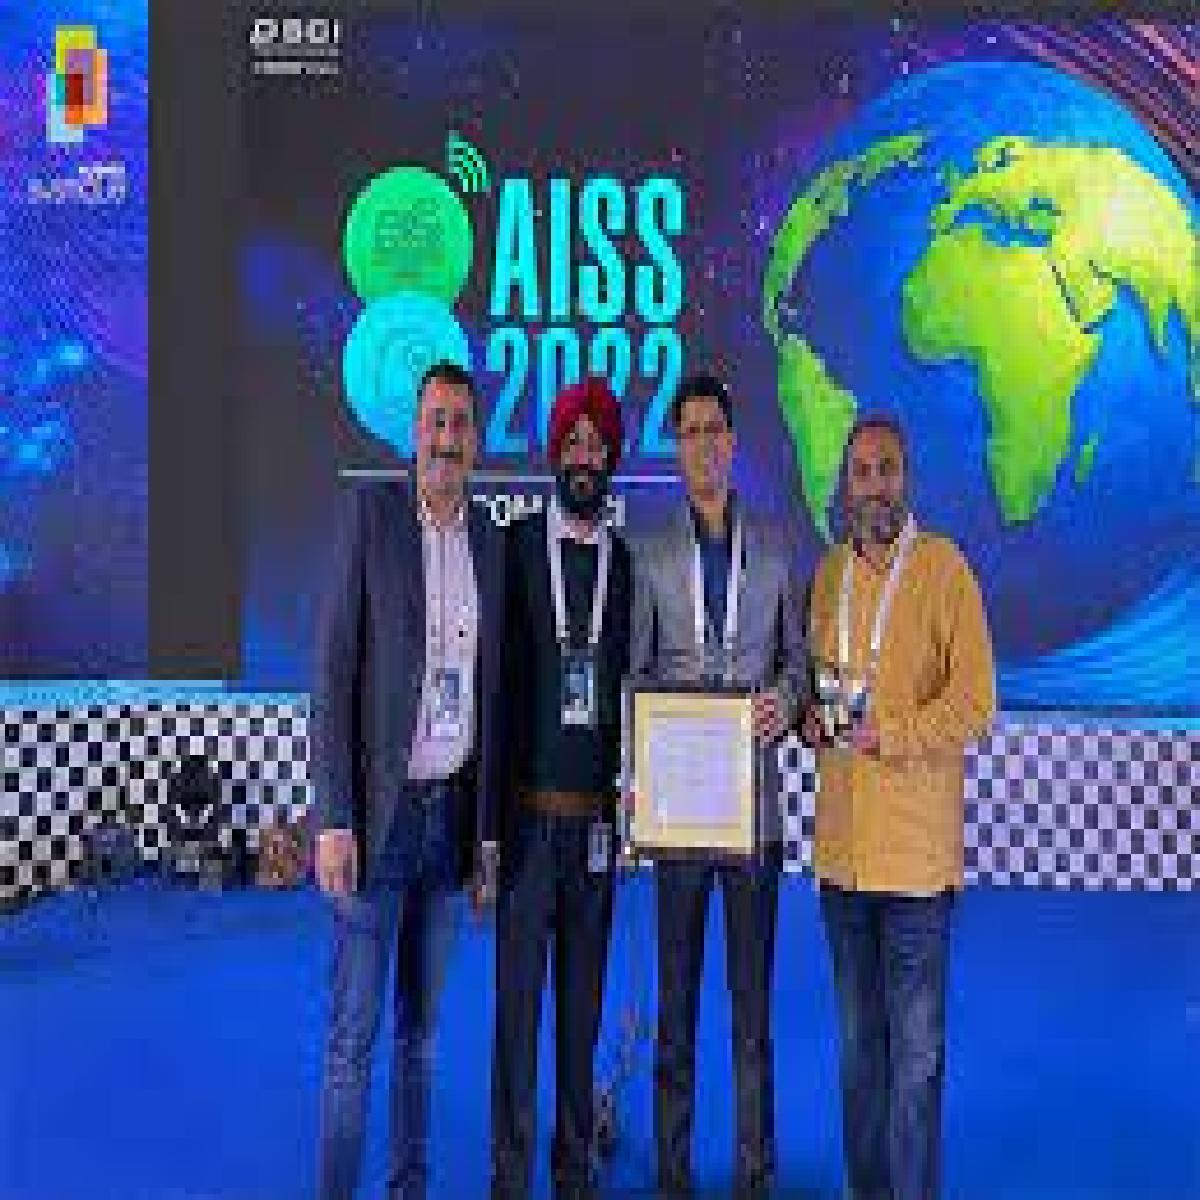 Hughes Systique Wins the Best Security Practices in IT-ITES Sector in the SME Category at the 17th Edition of NASSCOM-DSCI’s AISS 2022